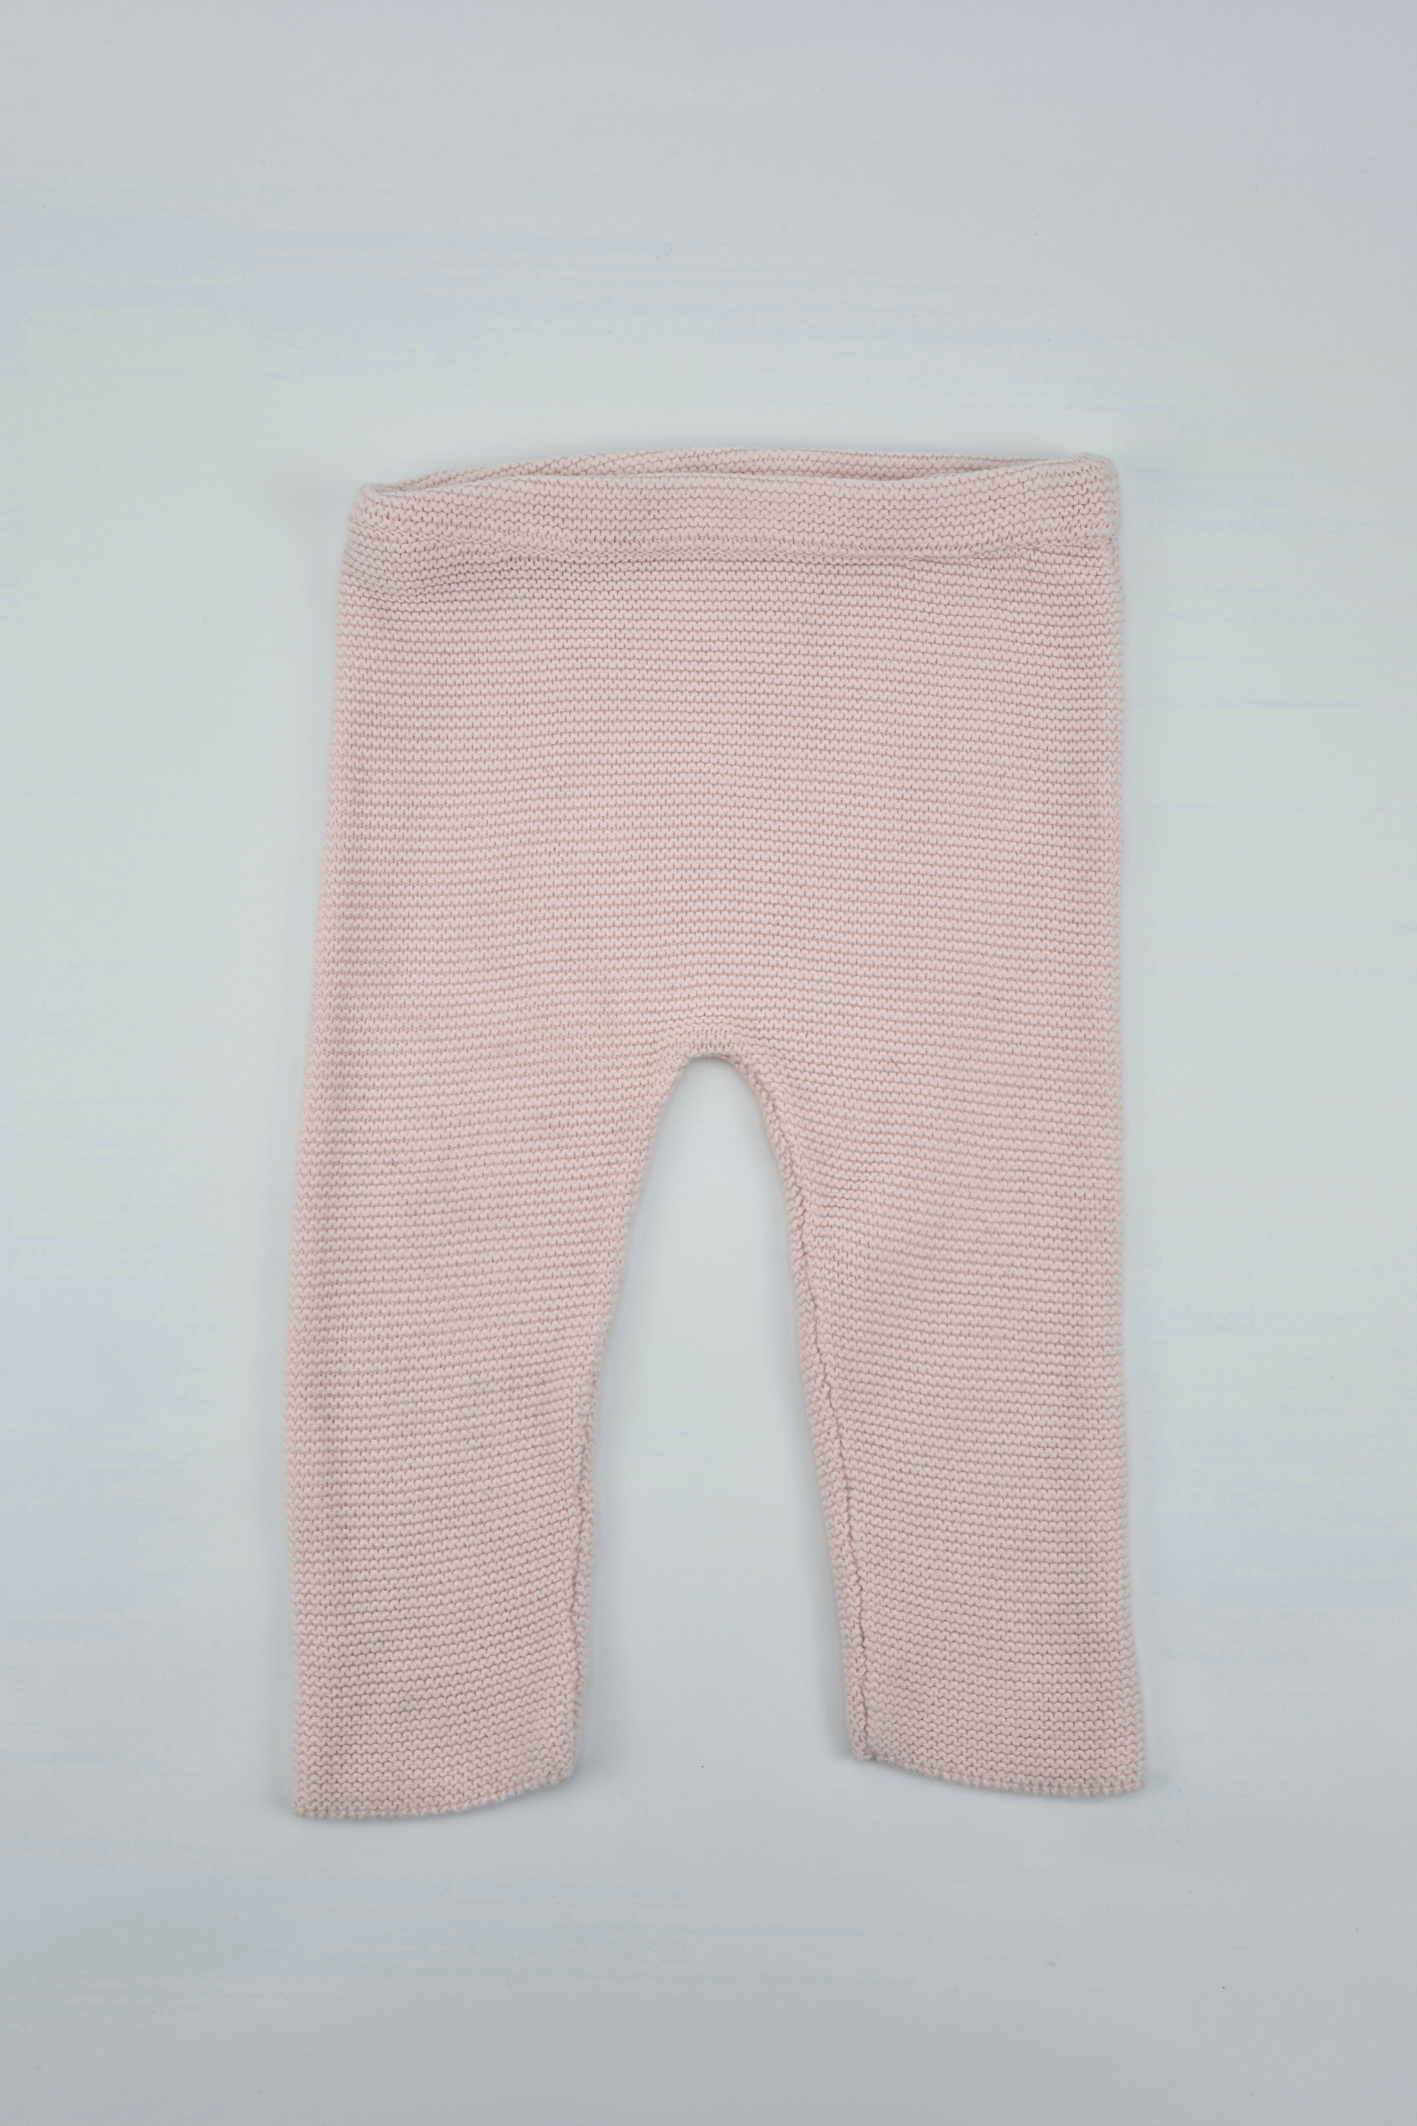 9-12m - Pink Knit Trousers (The Little White Company)